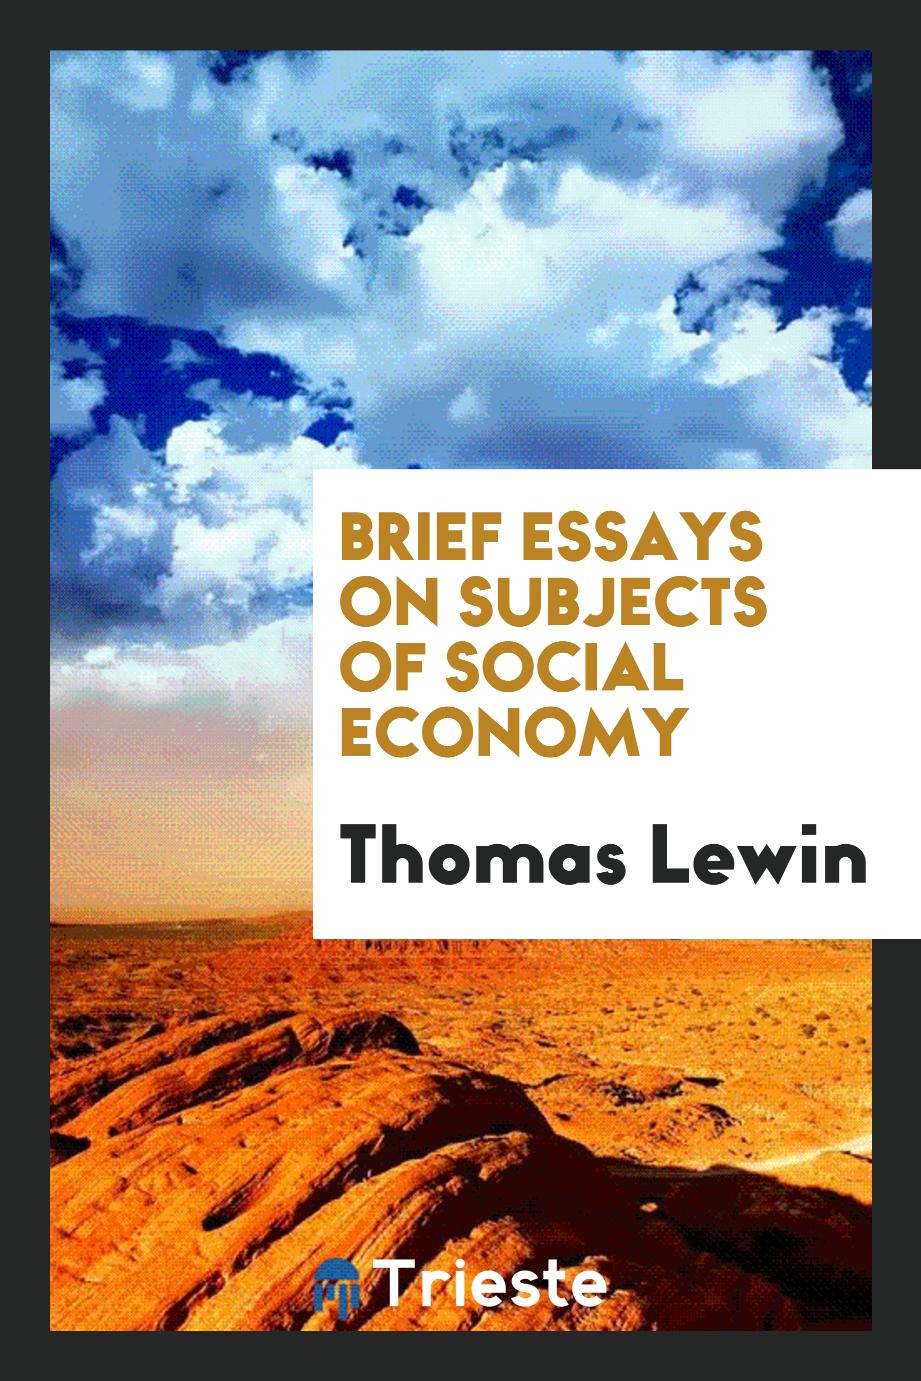 Brief Essays on Subjects of Social Economy